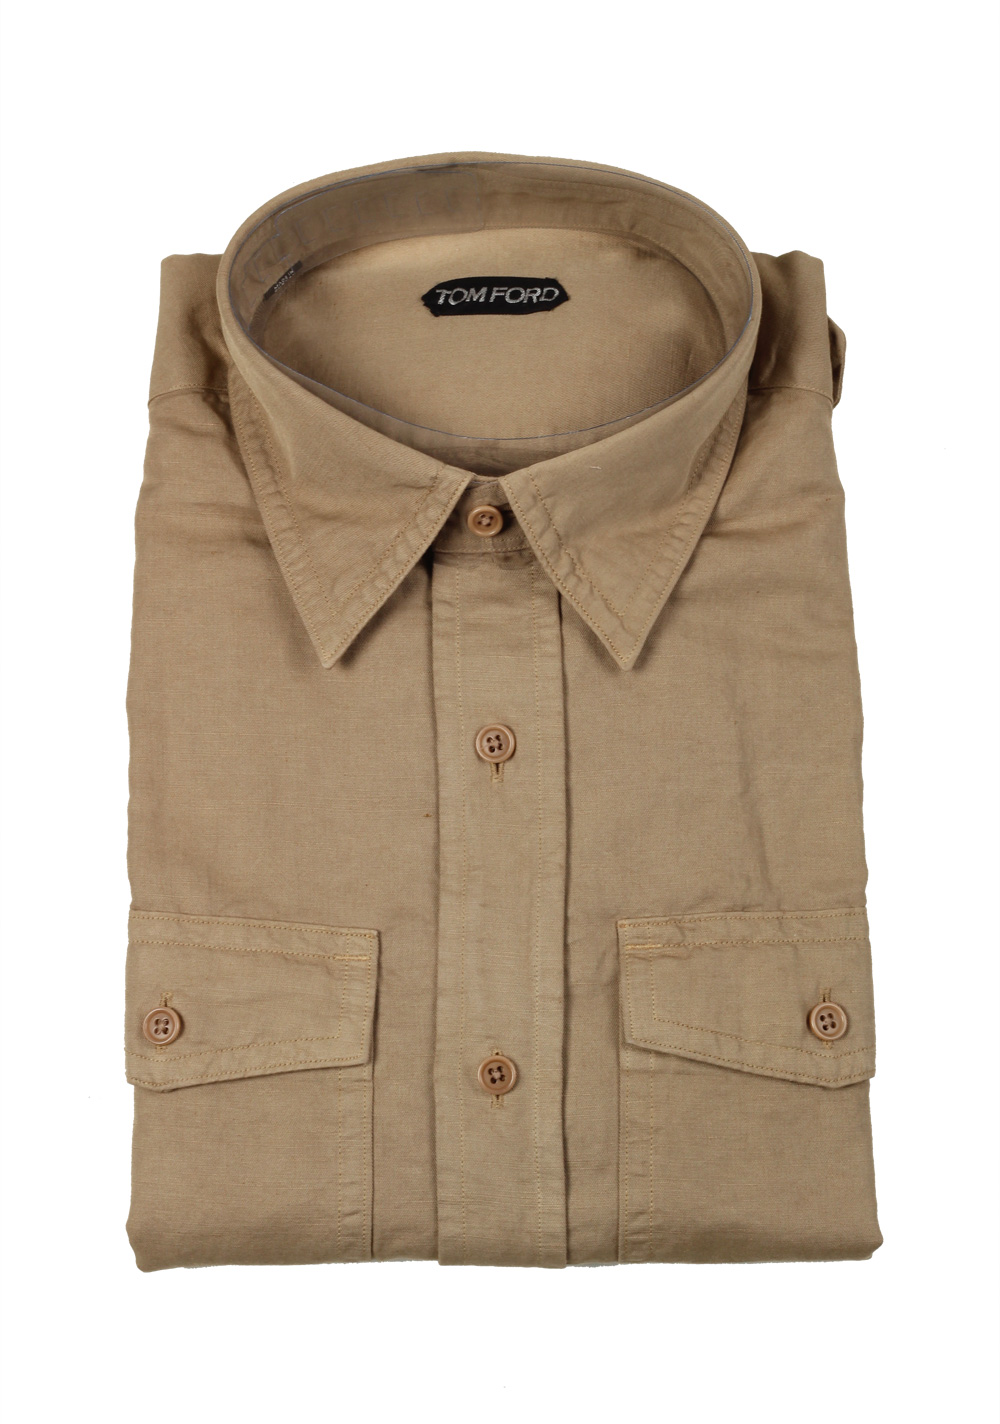 TOM FORD Solid Beige Casual Shirt Size 43 / 17 U.S. | Costume Limité